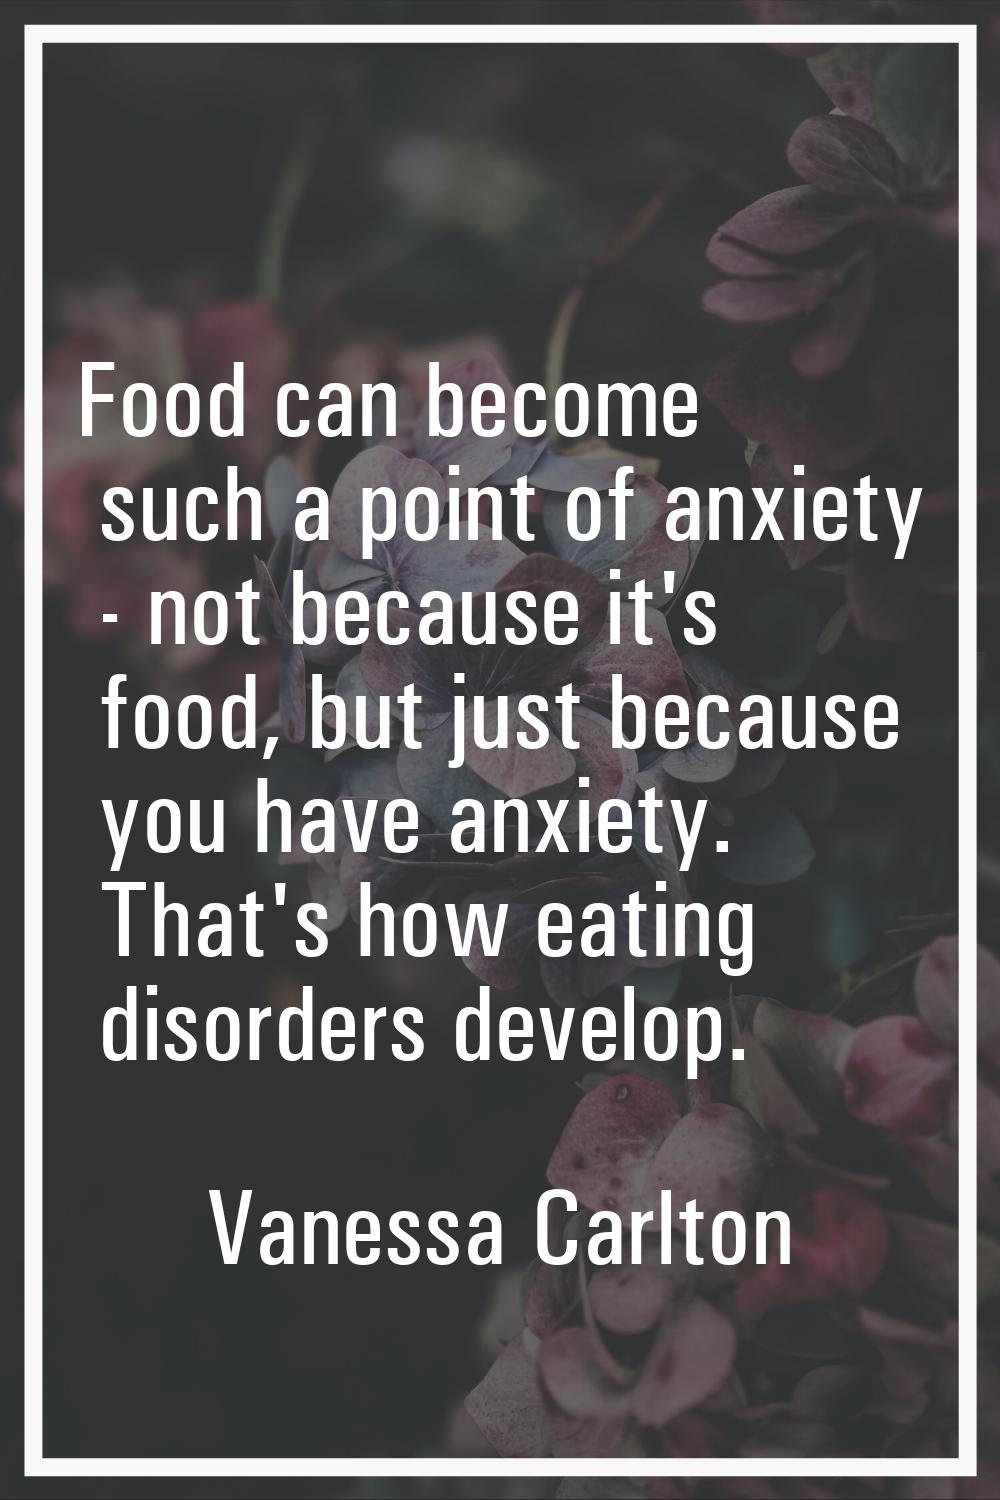 Food can become such a point of anxiety - not because it's food, but just because you have anxiety.